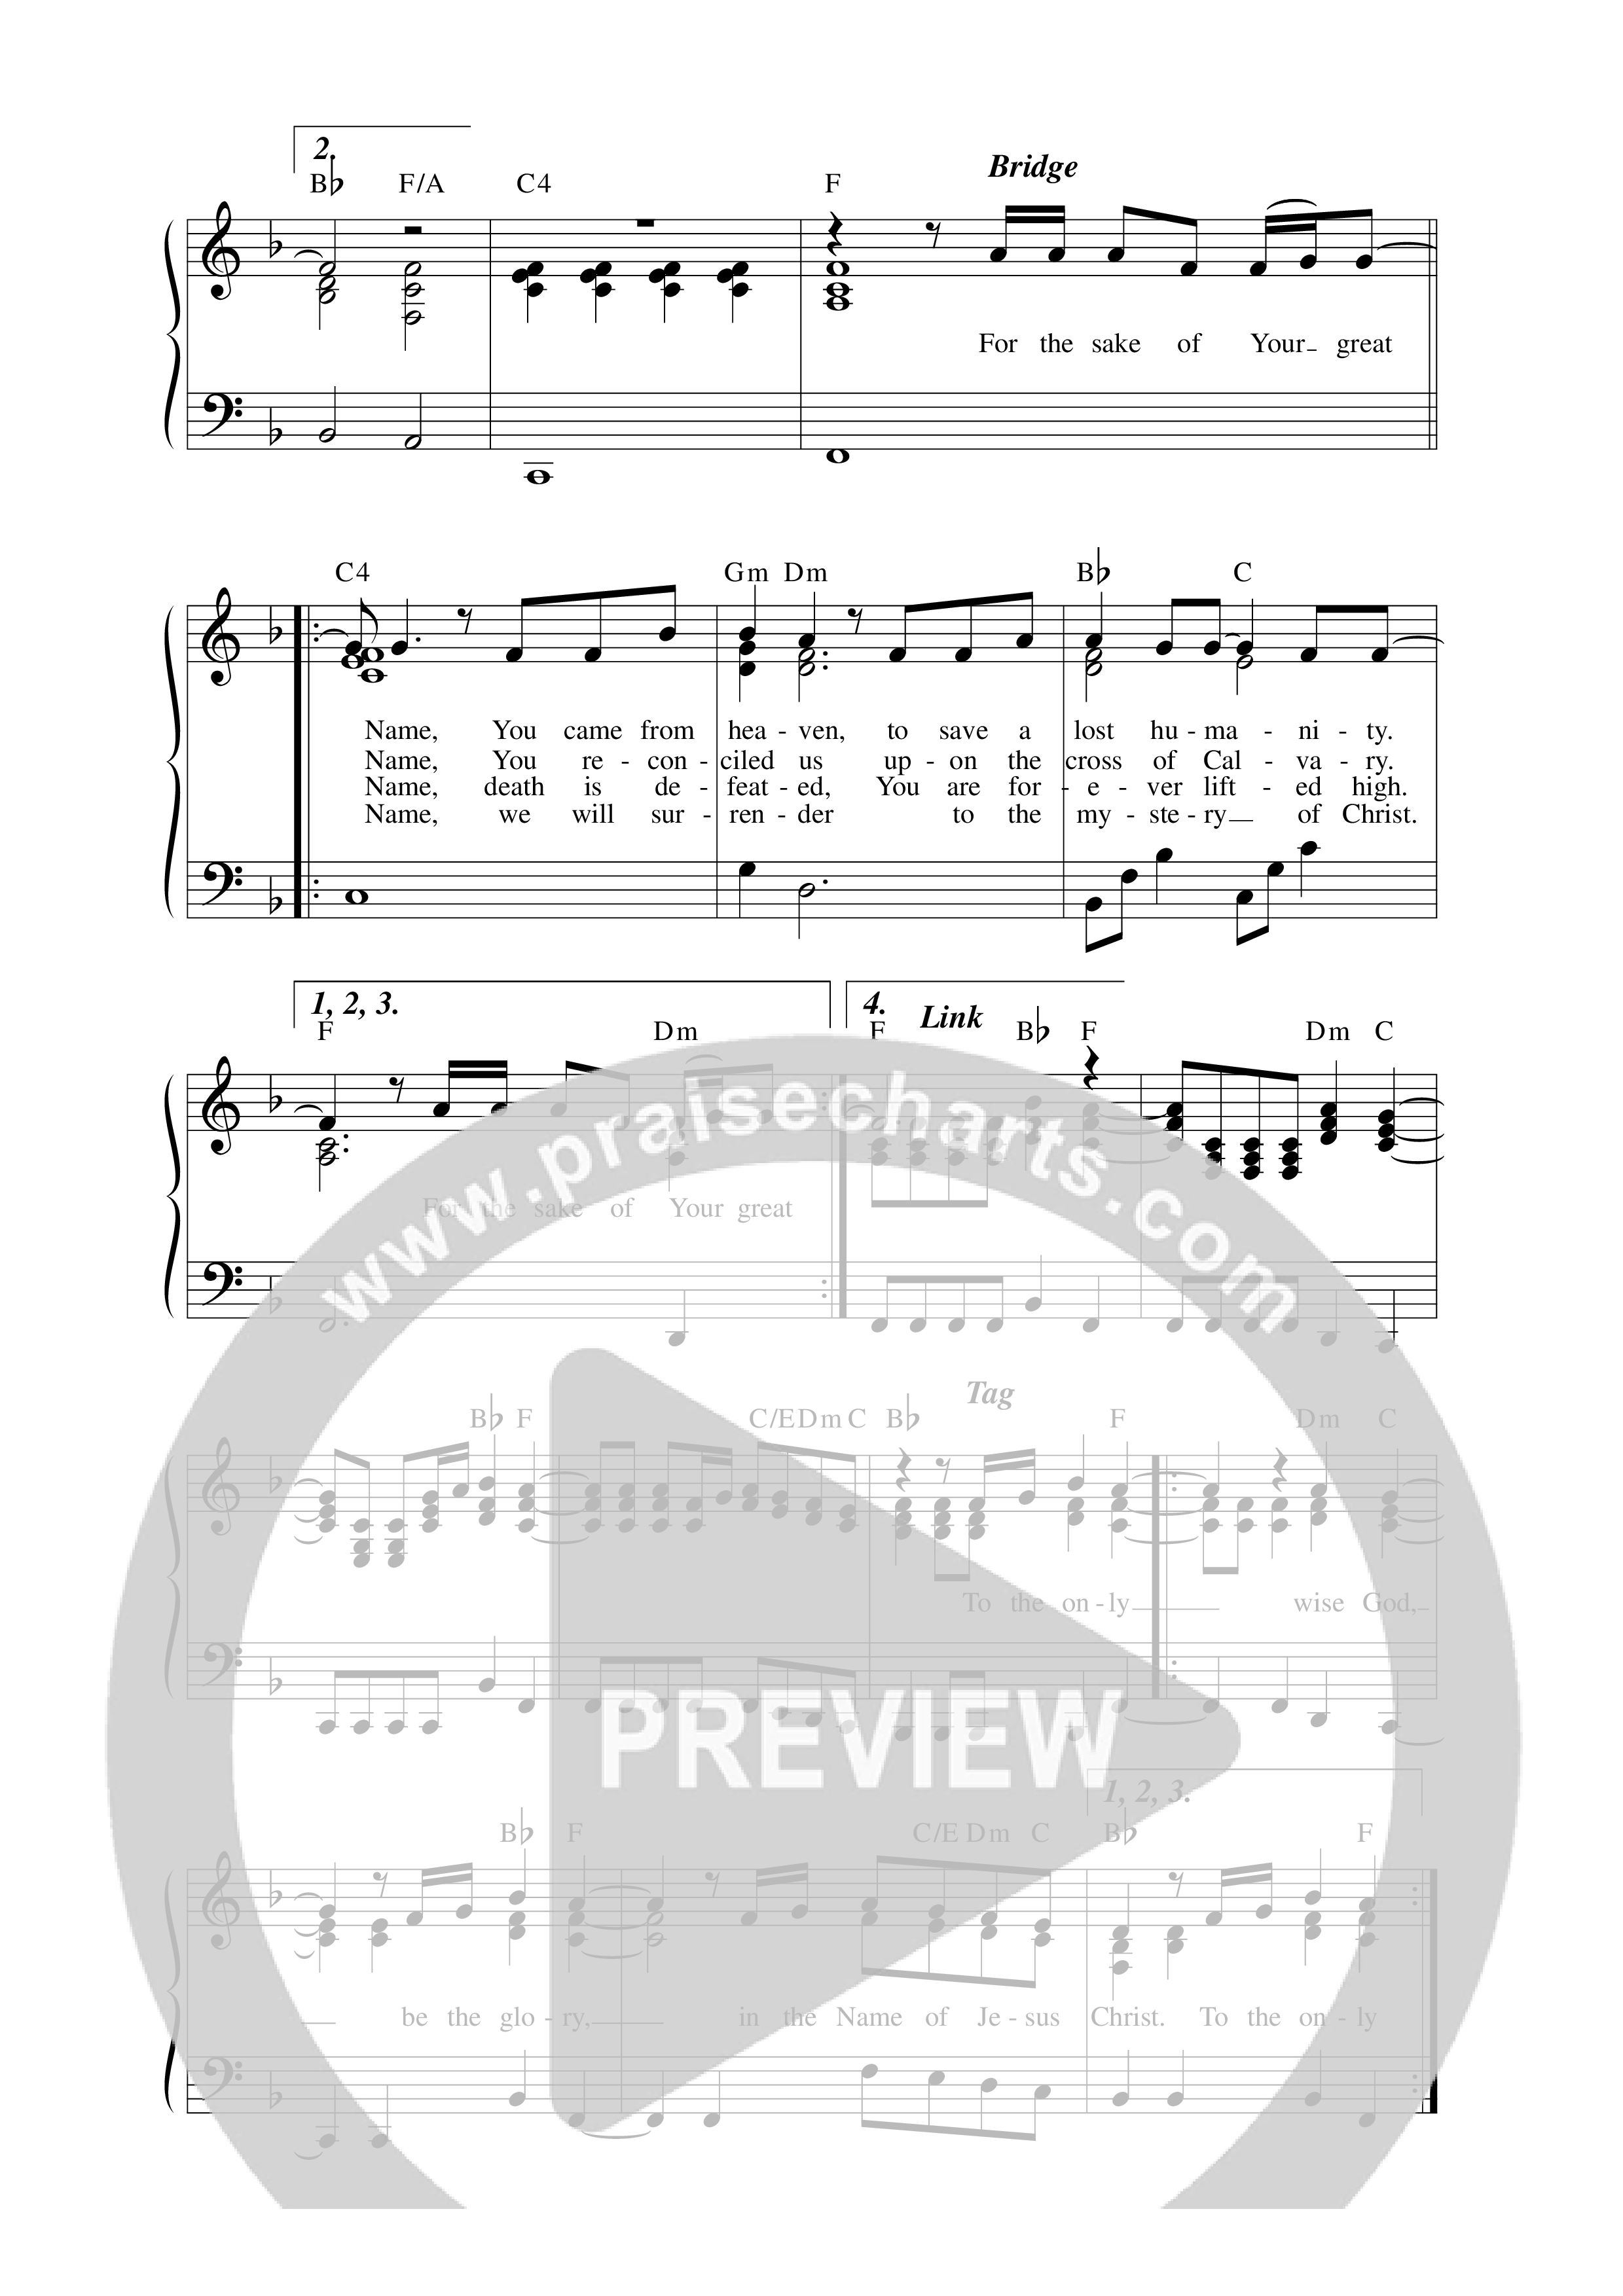 The Name Of The Lord (REVERE Unscripted) Lead Sheet Melody (REVERE / Mitch Wong / Becca Folkes)